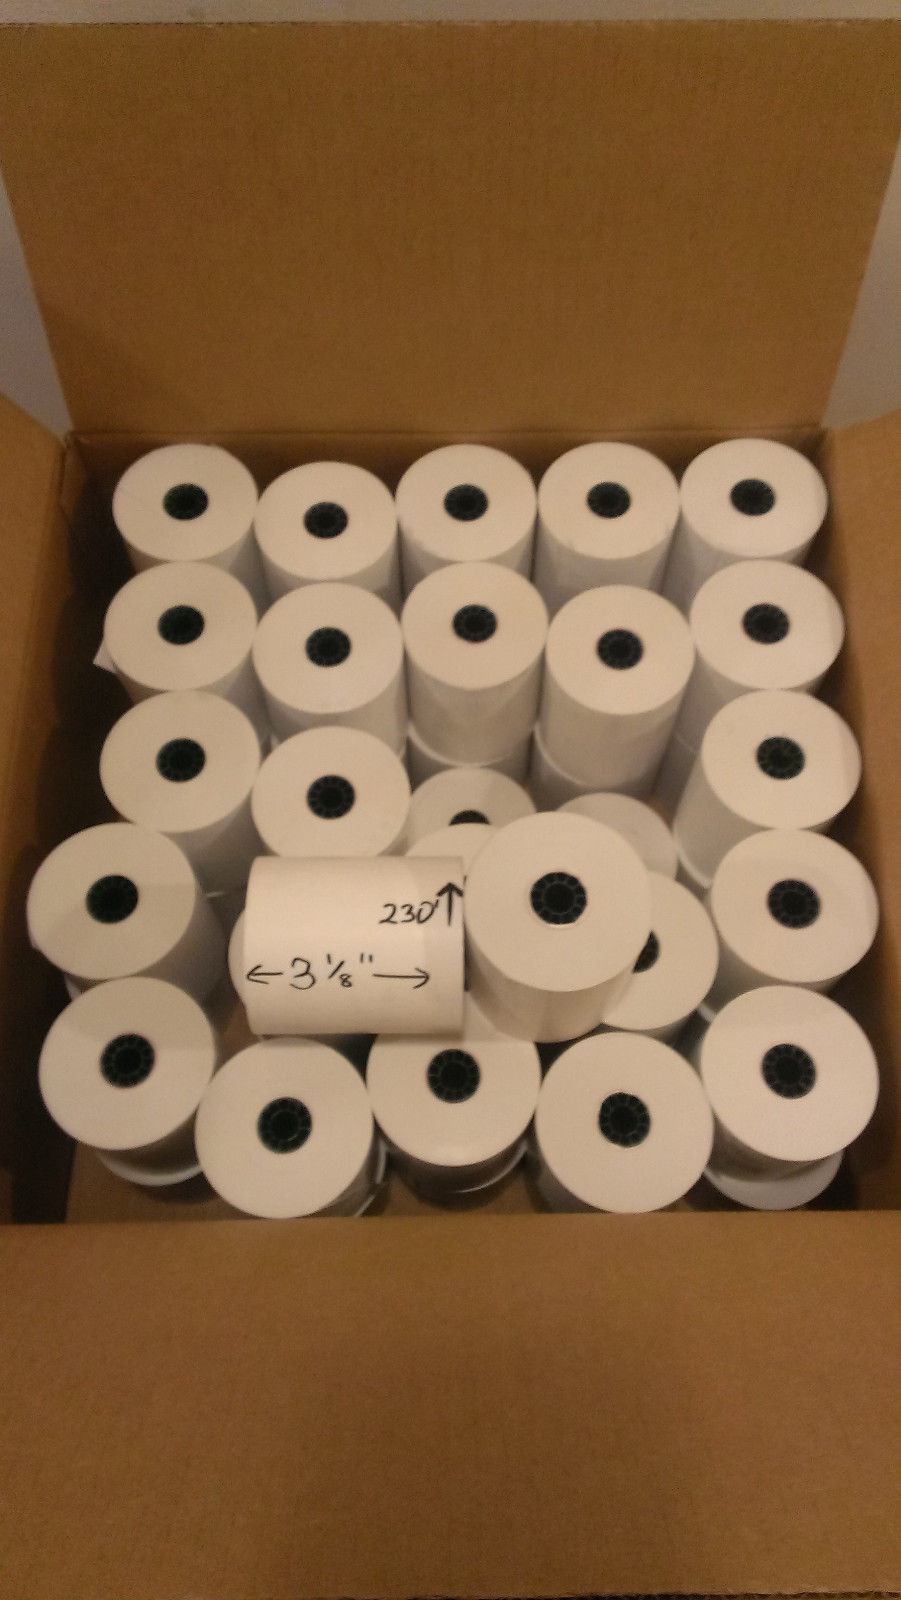 Stock 3.125 x 230' Thermal Receipt Paper, 50 Rolls/Case, compatible w/Star  Receipt Printers